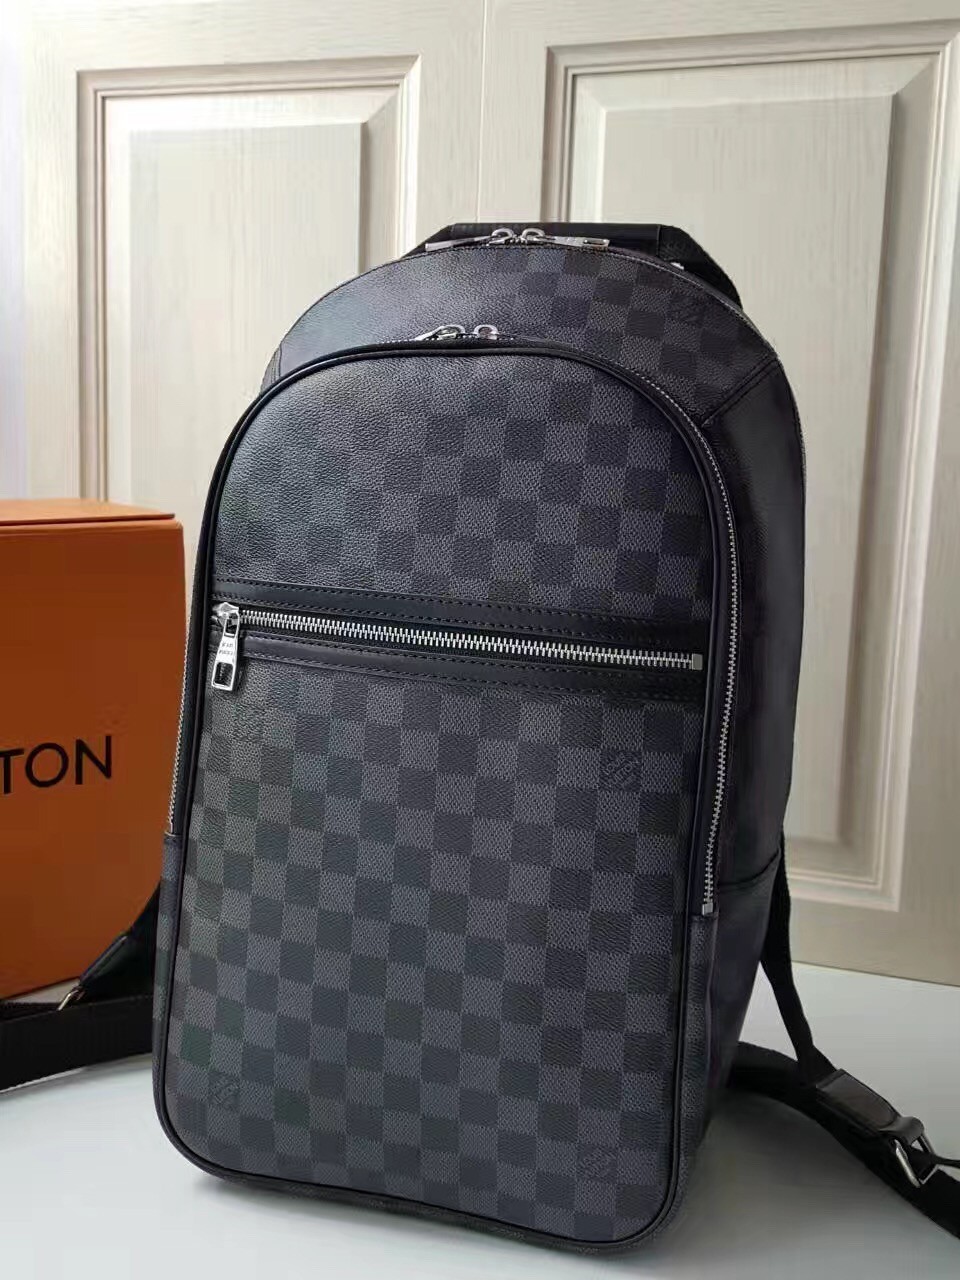 Replica Louis Vuitton Michael Backpack In Damier Graphite Canvas N58024